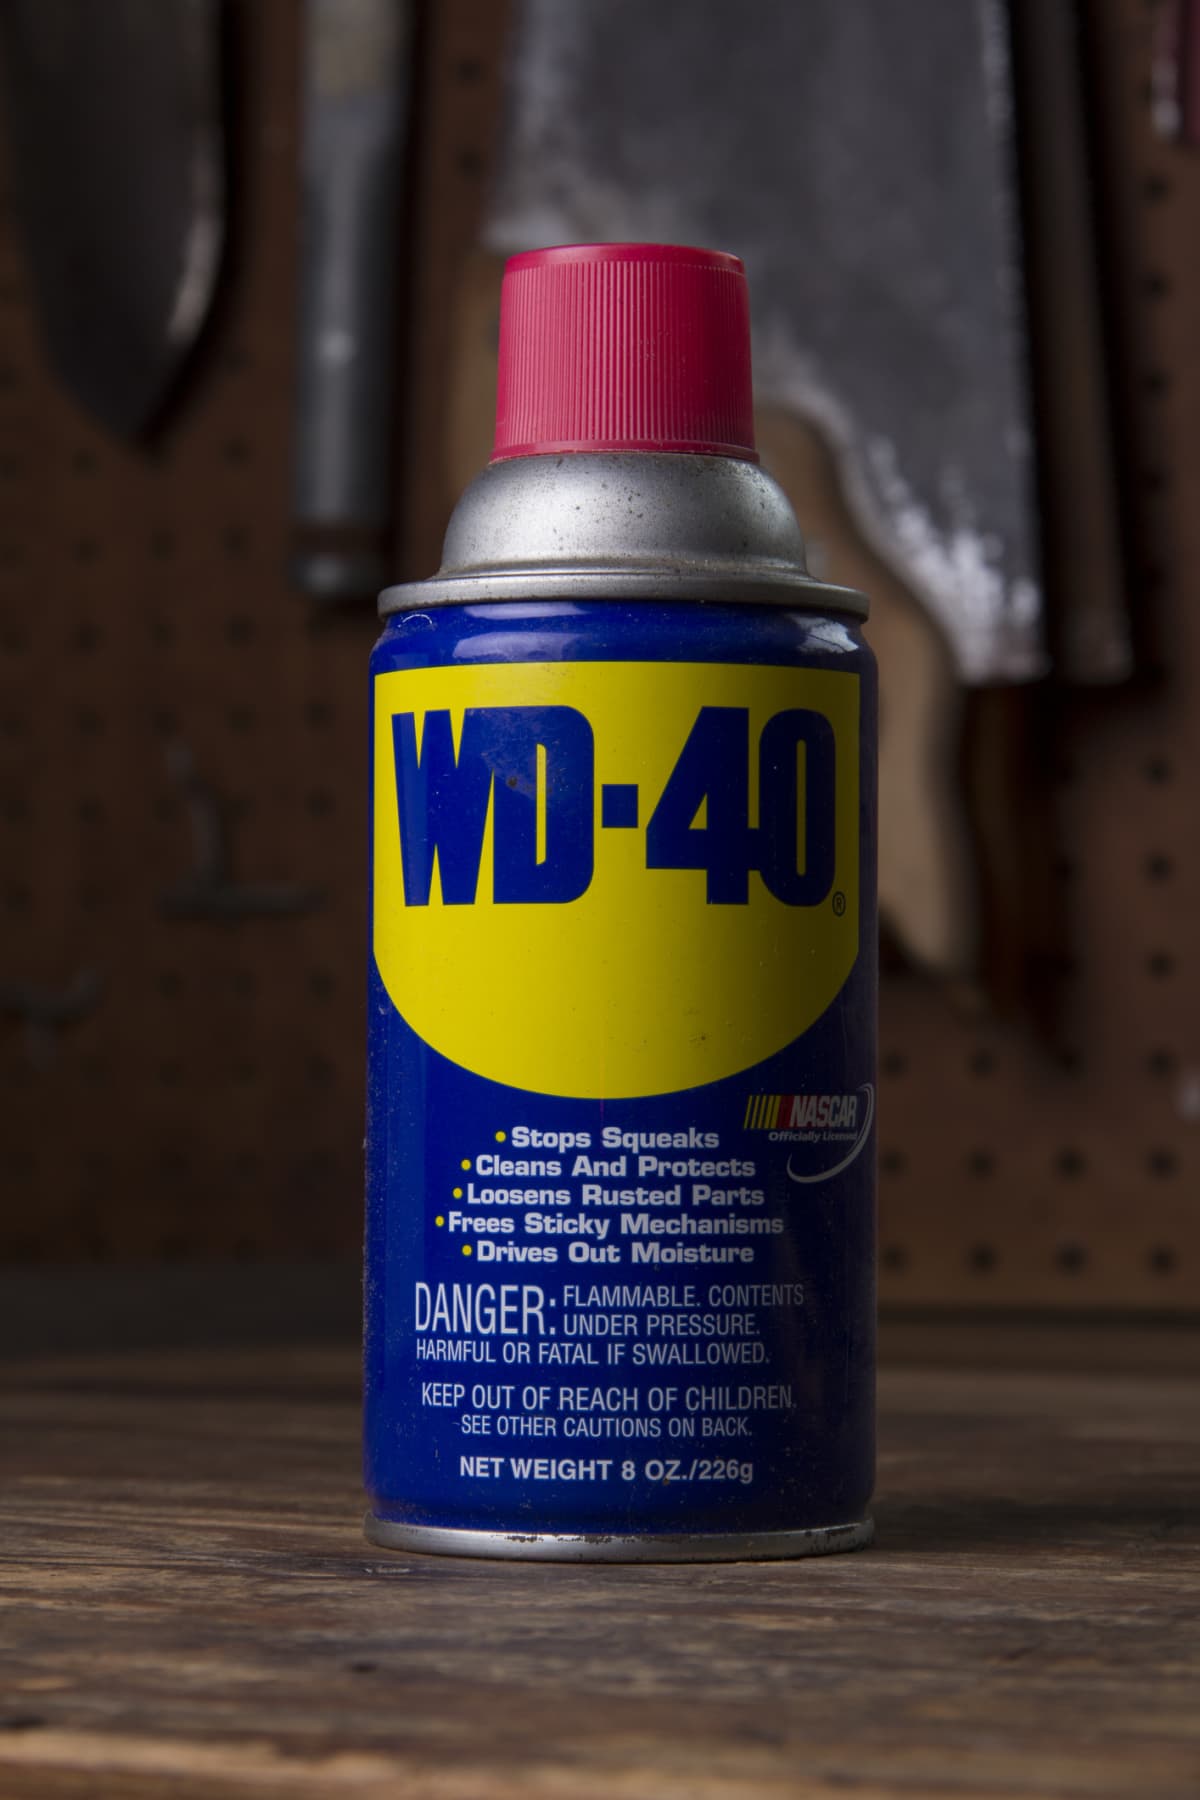 A can of WD-40, a staple of every garage and workplace